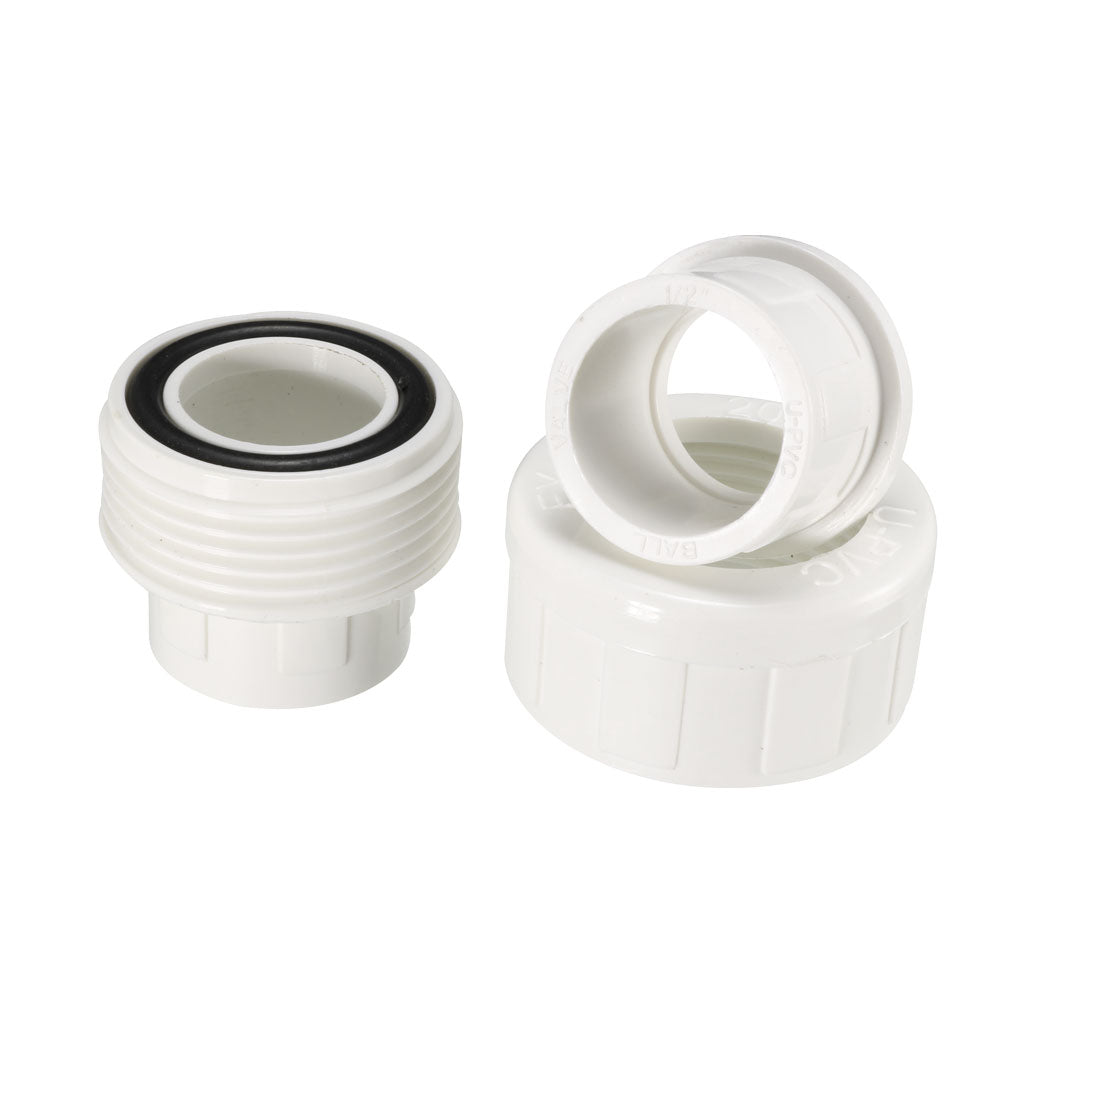 uxcell Uxcell 20mm Slip x 20mm Slip PVC Pipe Fitting Union Solvent Socket Quick Connector